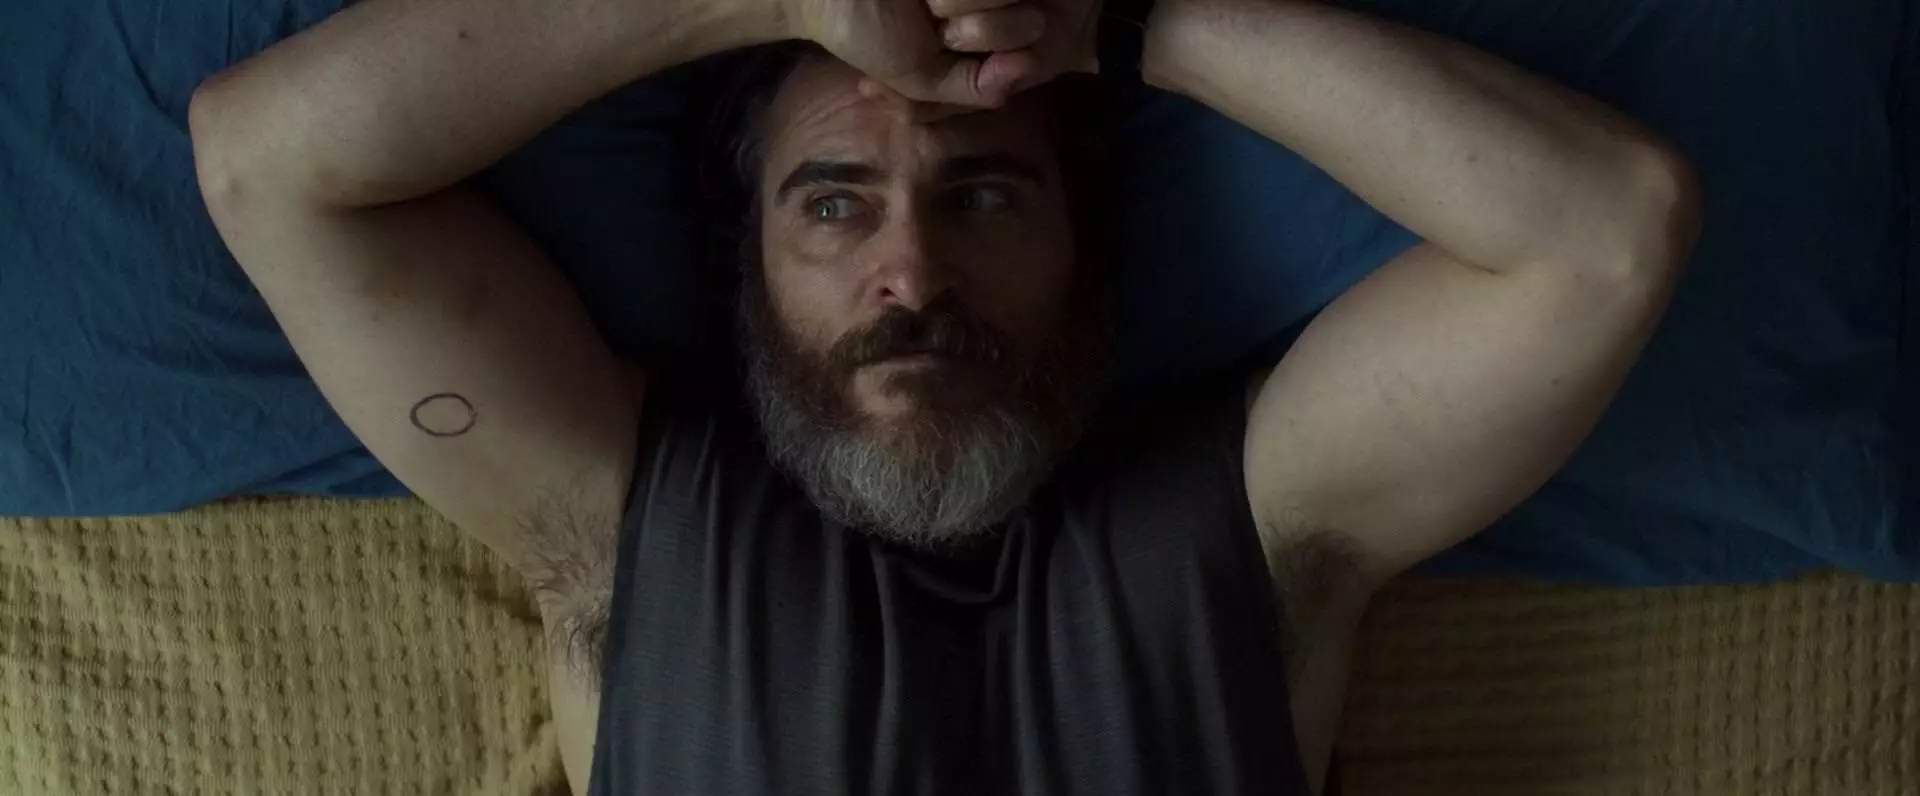 You Were Never Really Here is similar to Joker in many ways - though he is much less scrawny in the former.